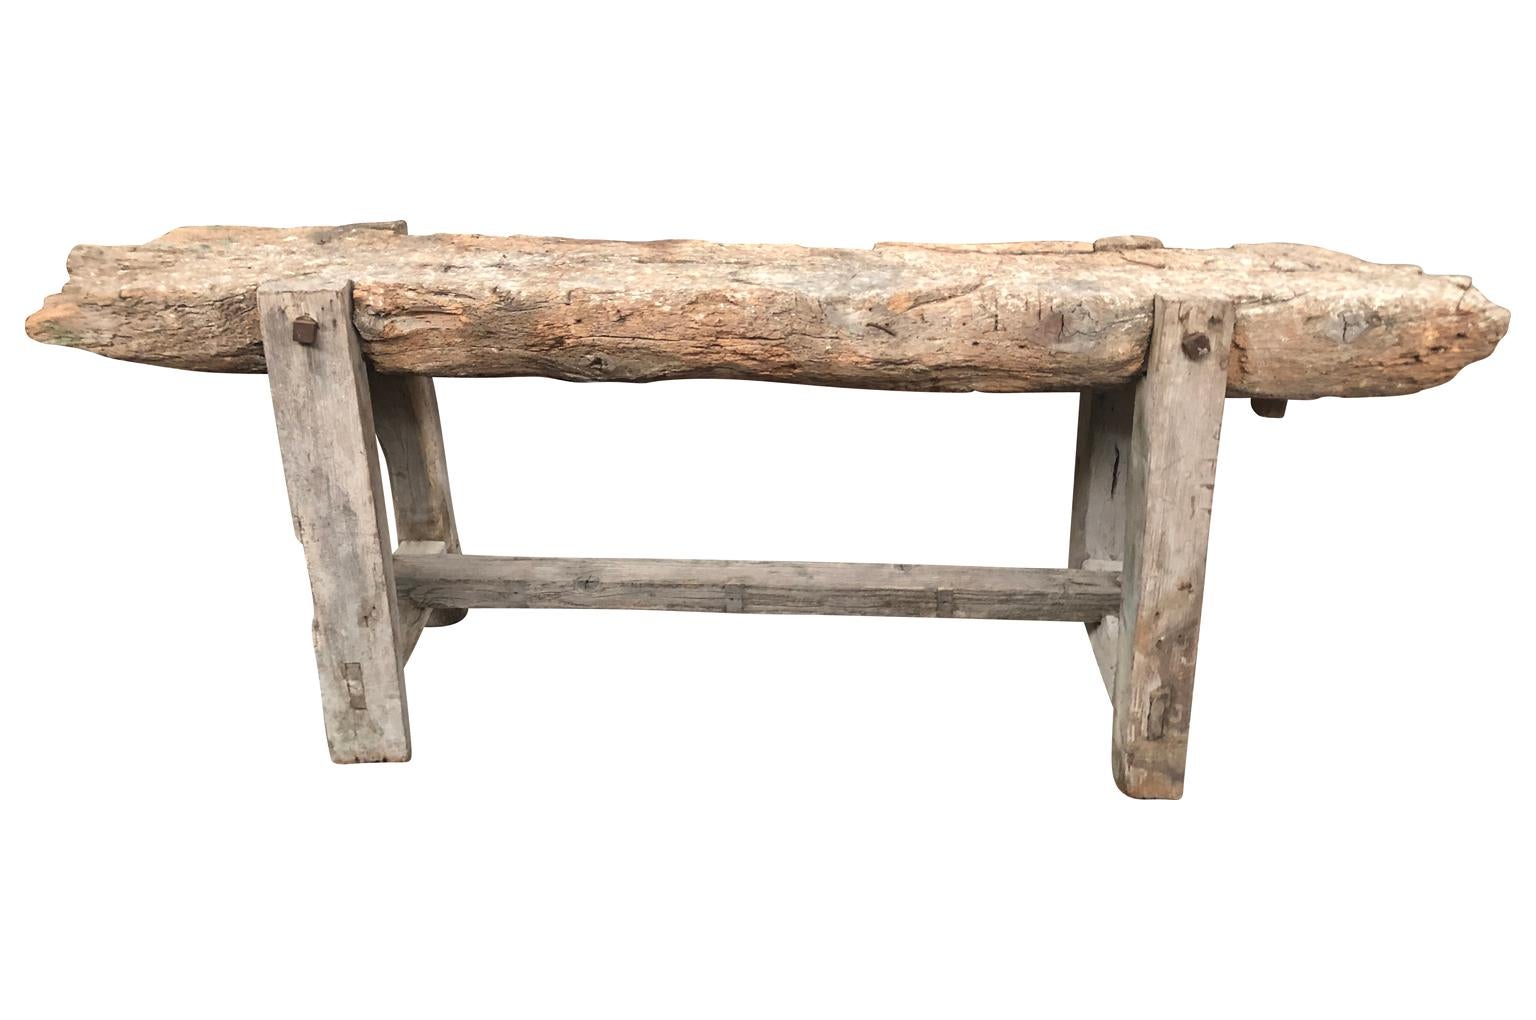 A very charming and Primitive French 18th century Etabli - work bench in naturally washed pine and oak. This piece has been well loved and remains very stabile. Perfect as a narrow console or sofa table.